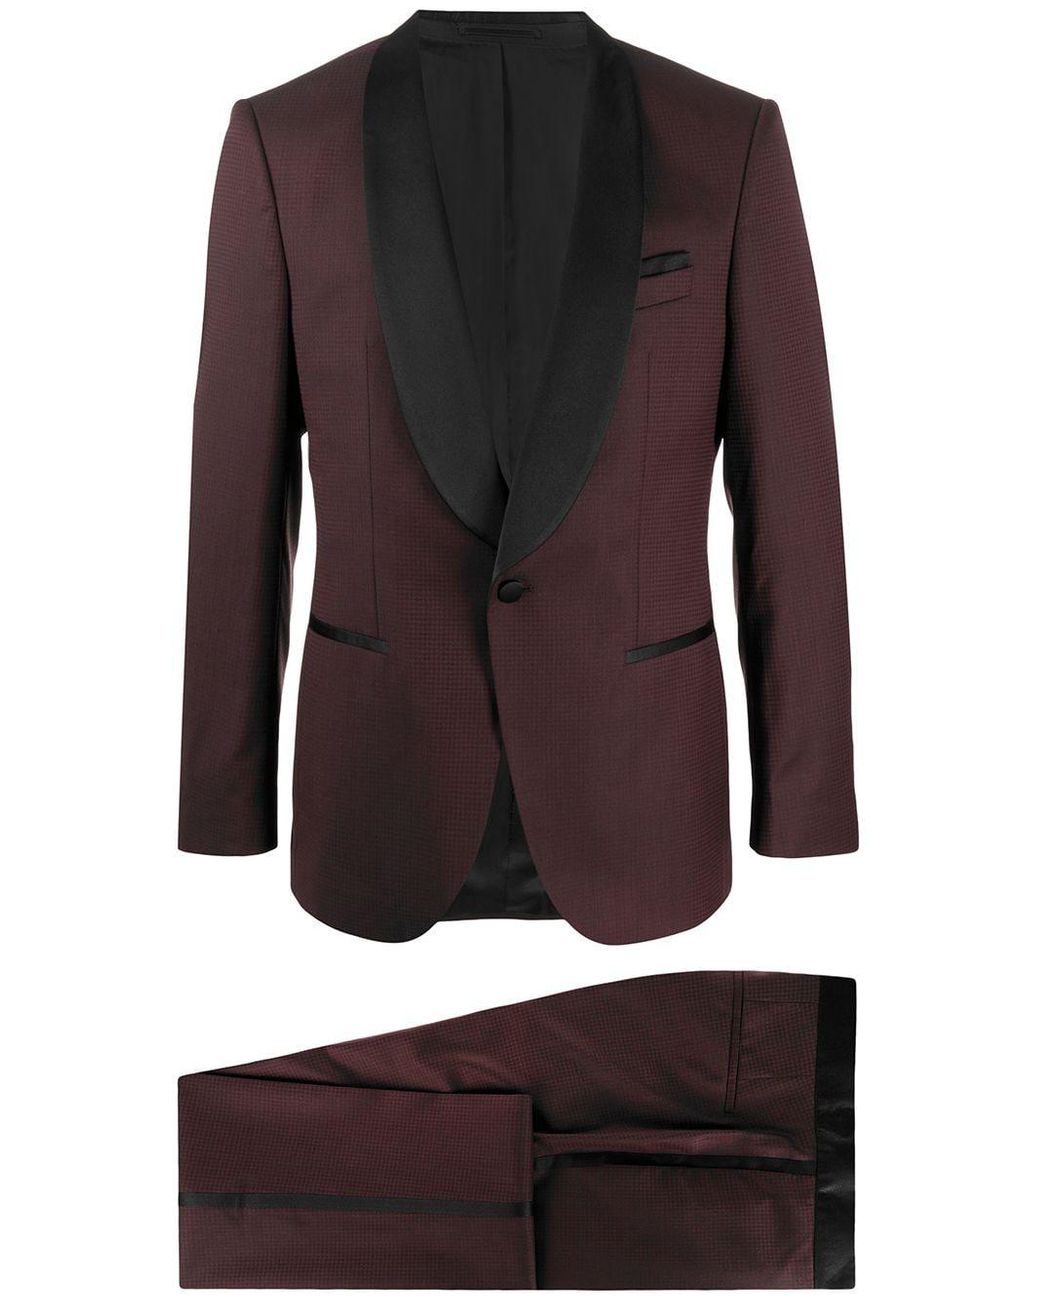 BOSS Wool Two-piece Dinner Suit in Red for Men - Lyst